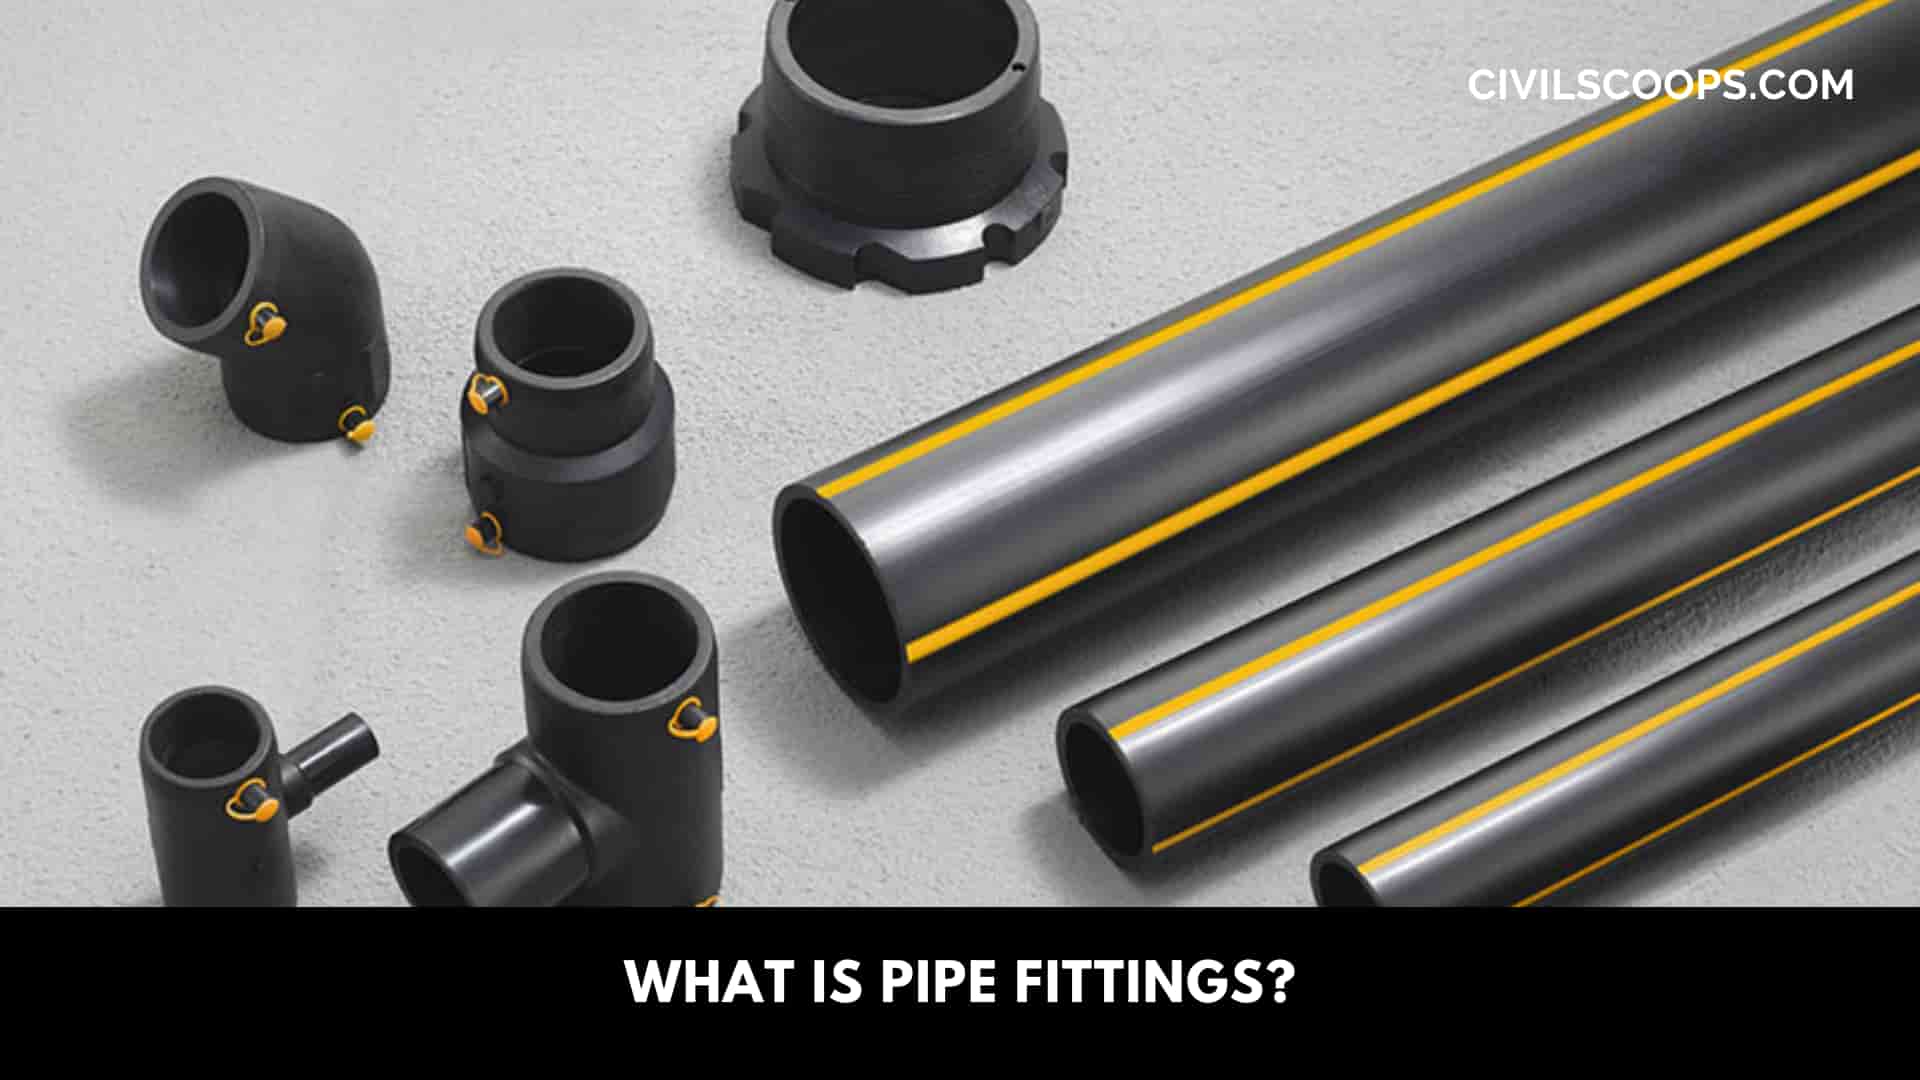 What Is Pipe Fittings?